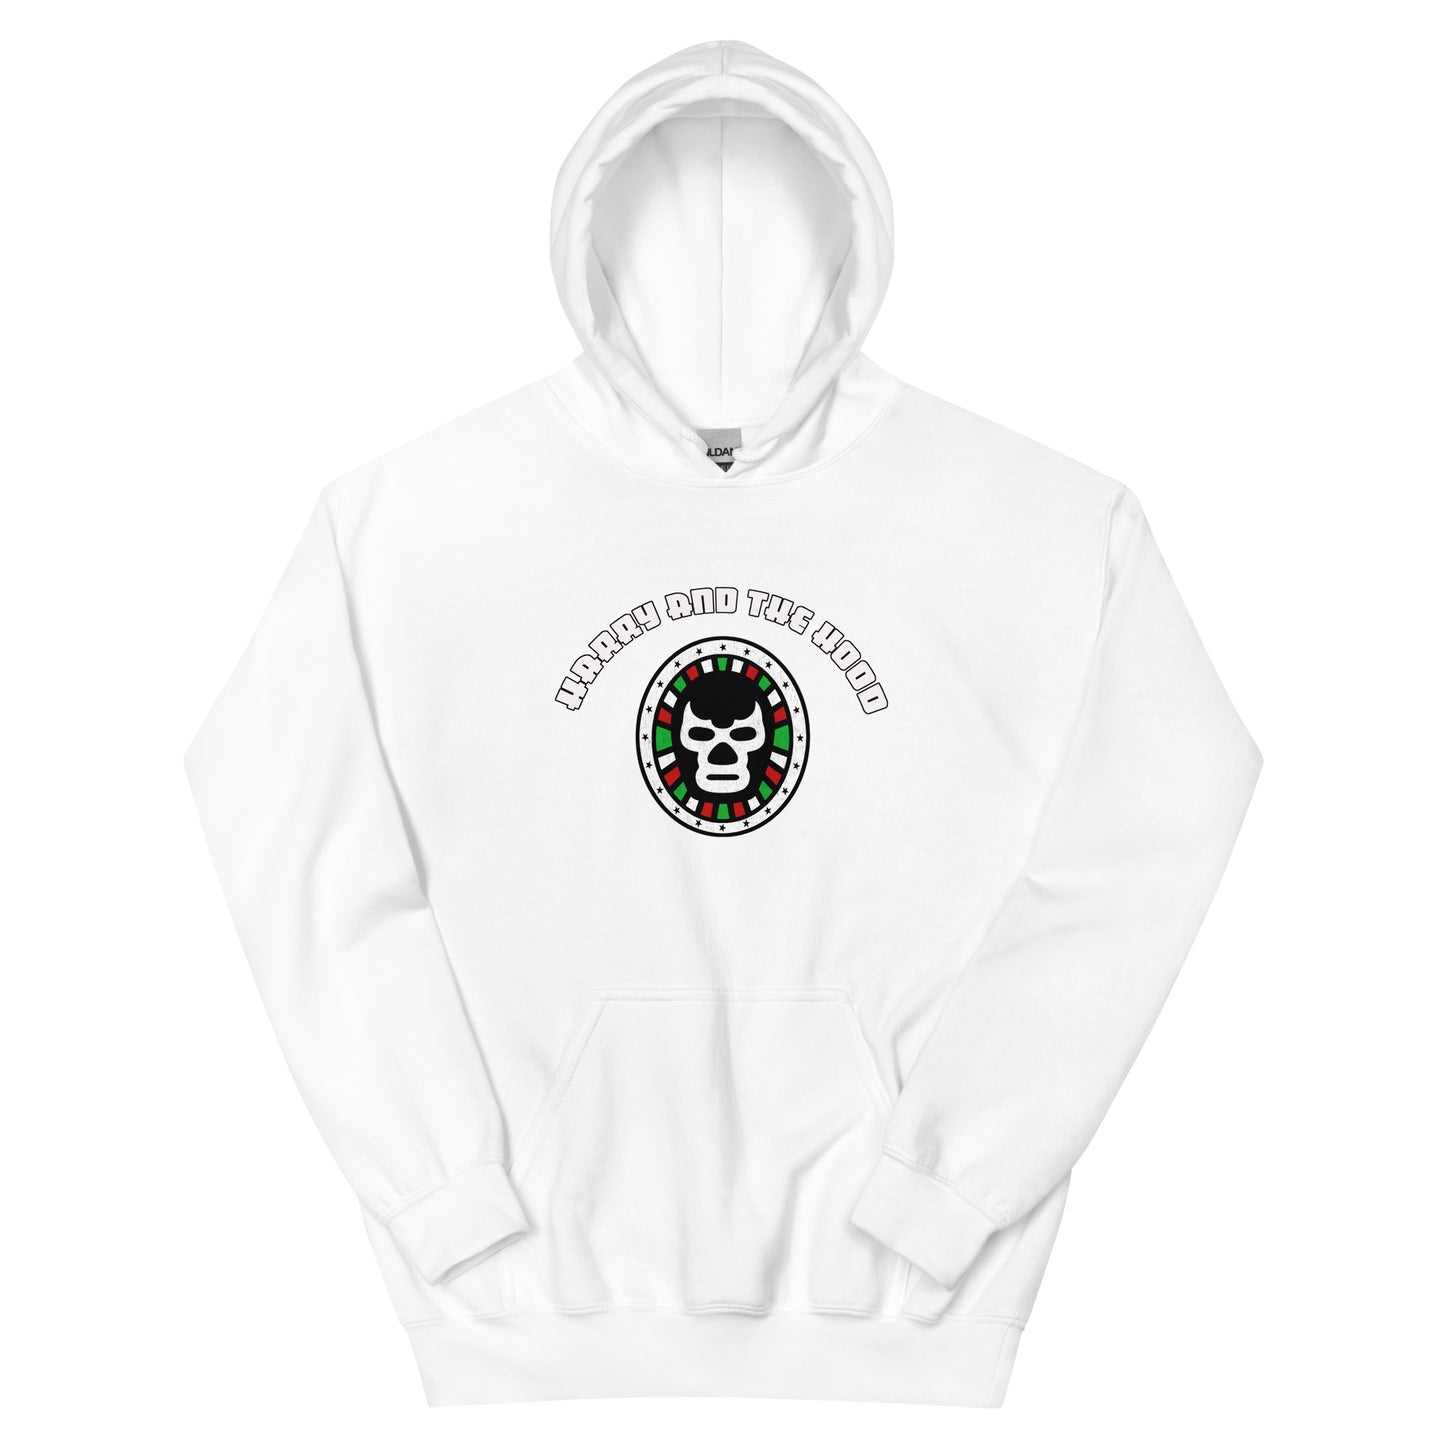 Harry and The Hood Lucha Libre Unisex Hoodie